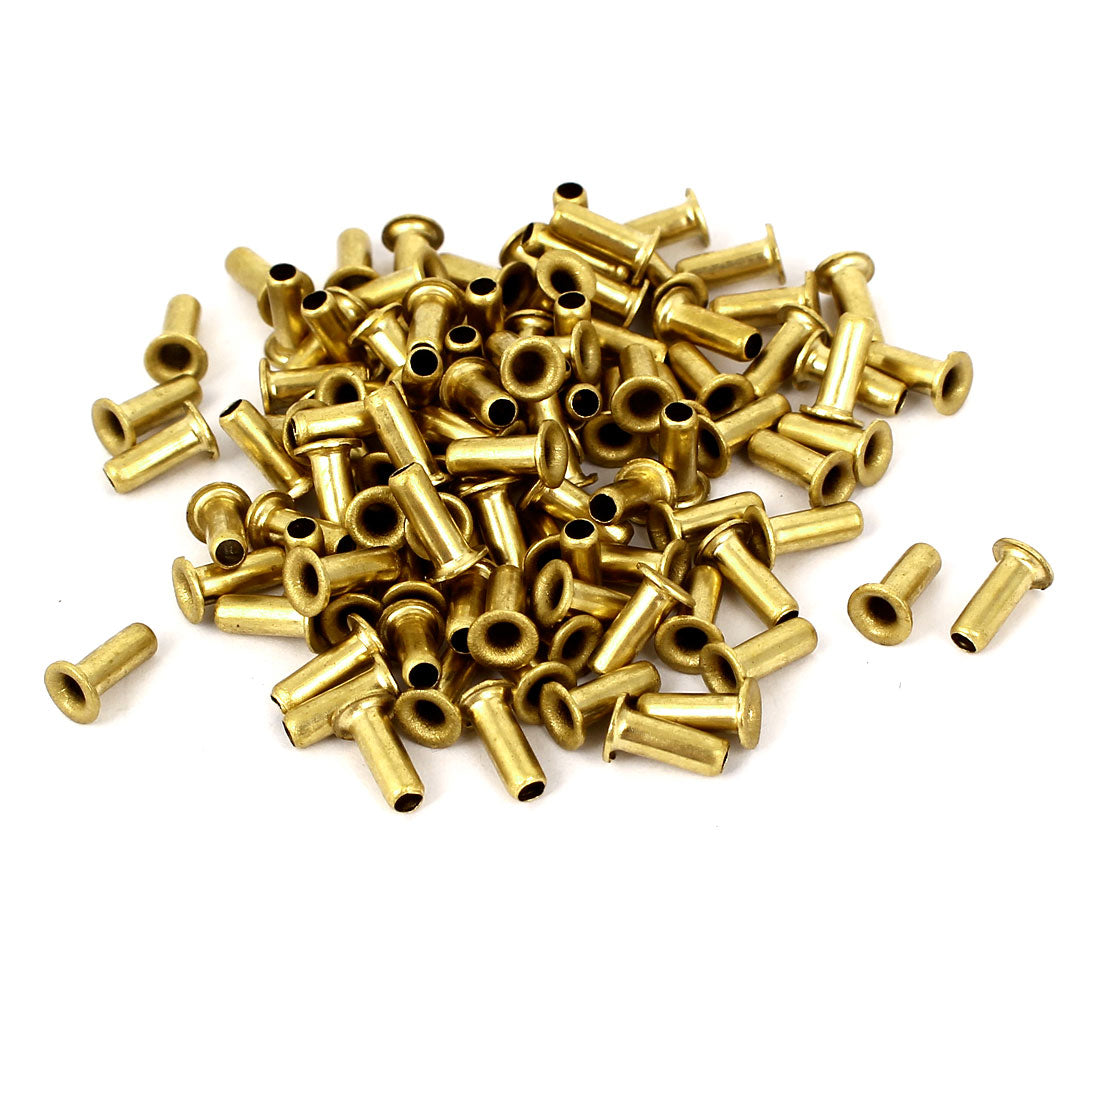 uxcell Uxcell 3mm x 8mm Through Hole Hollow Rivets Grommets Circuit Board PCB Nails Fastener 100pcs